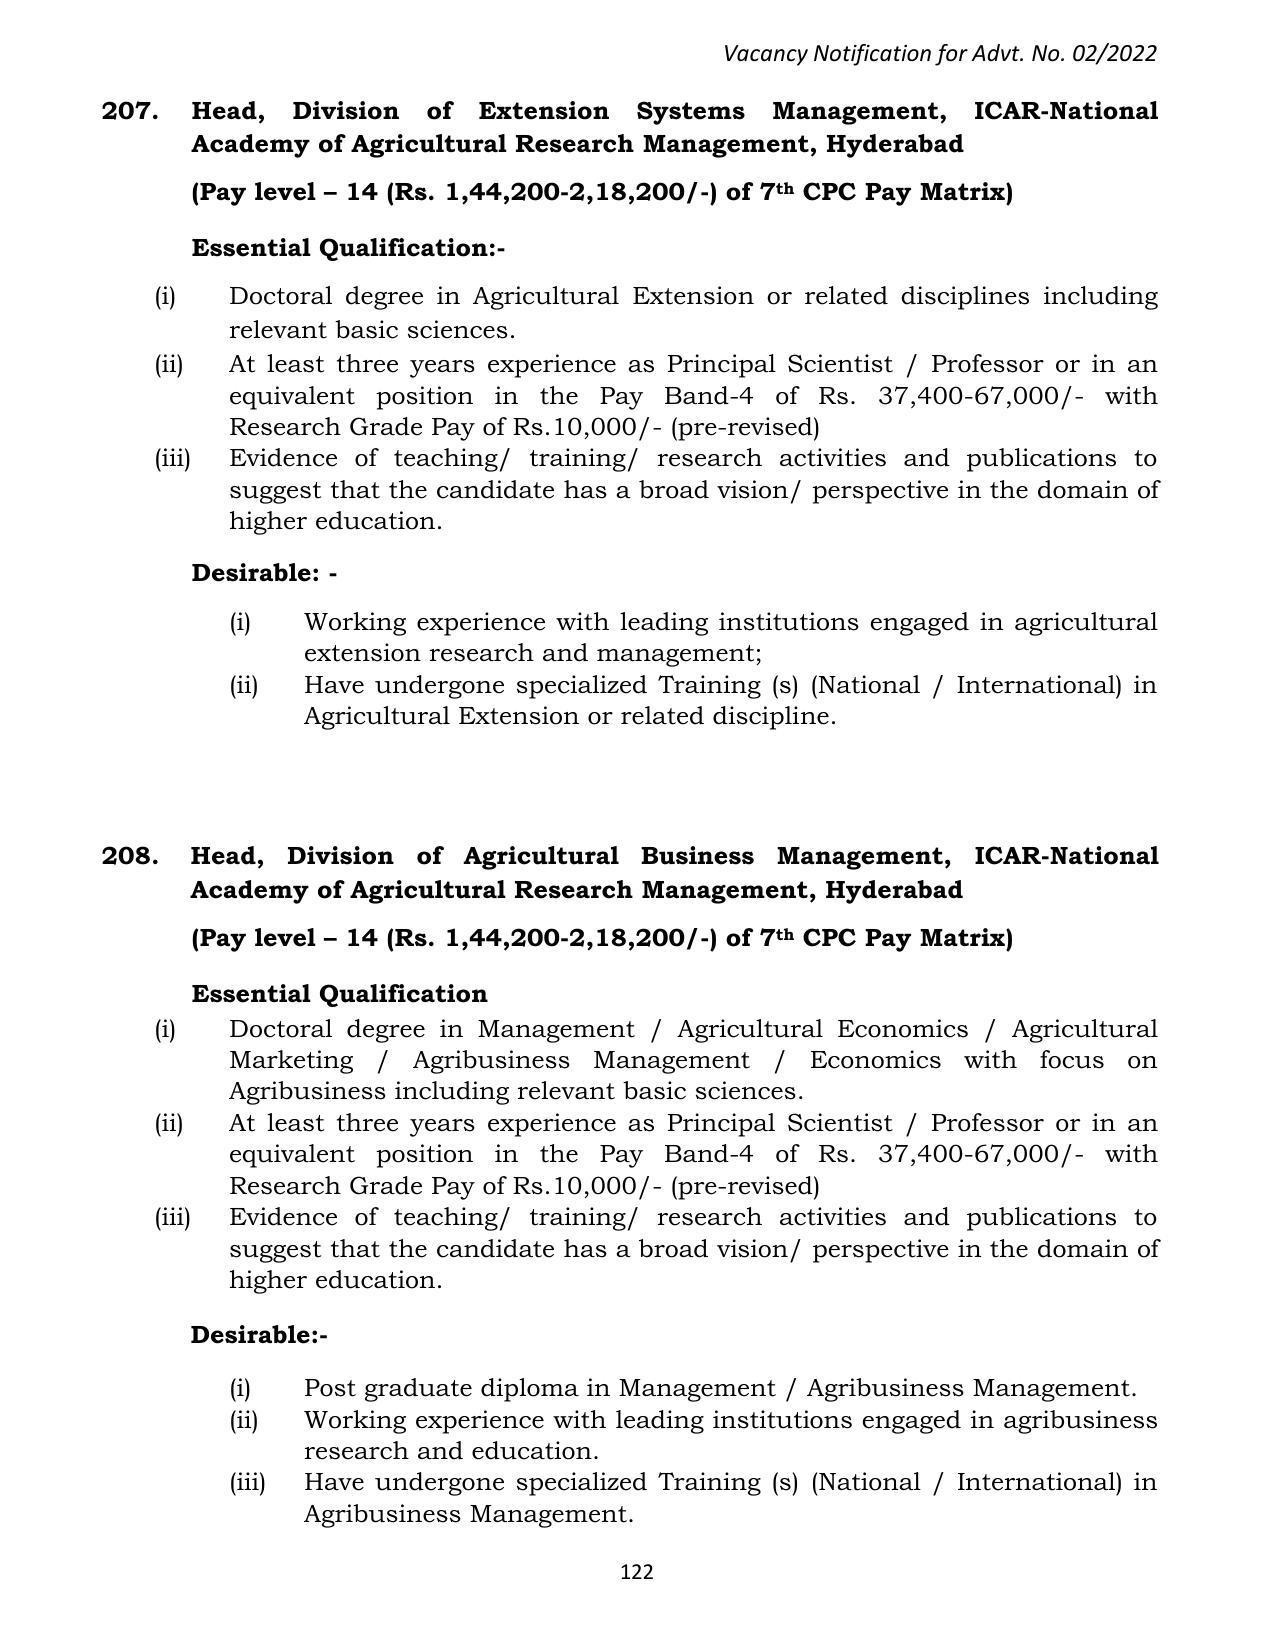 ASRB Non-Research Management Recruitment 2022 - Page 35